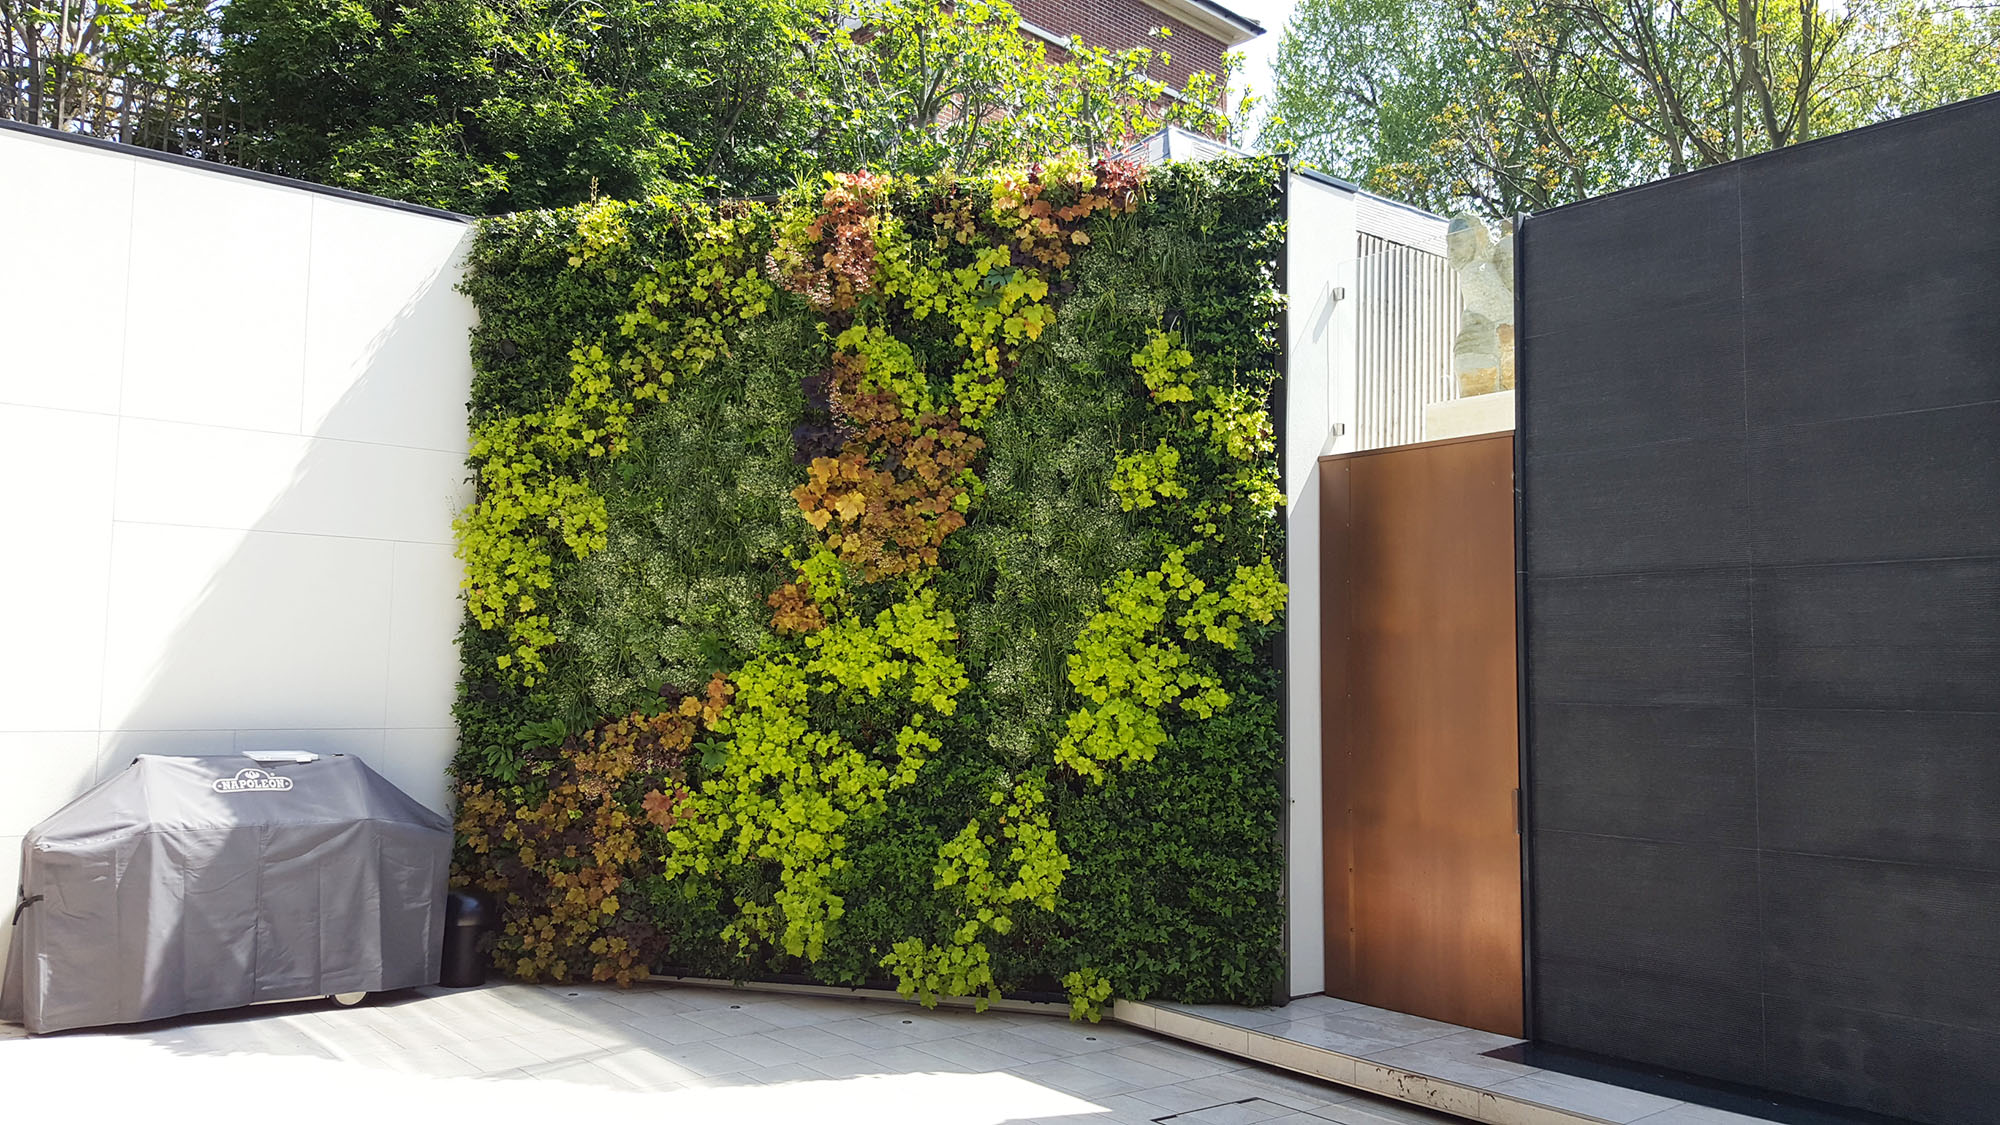 Patterned Planted Living Green Wall At Private Residence Patio Area